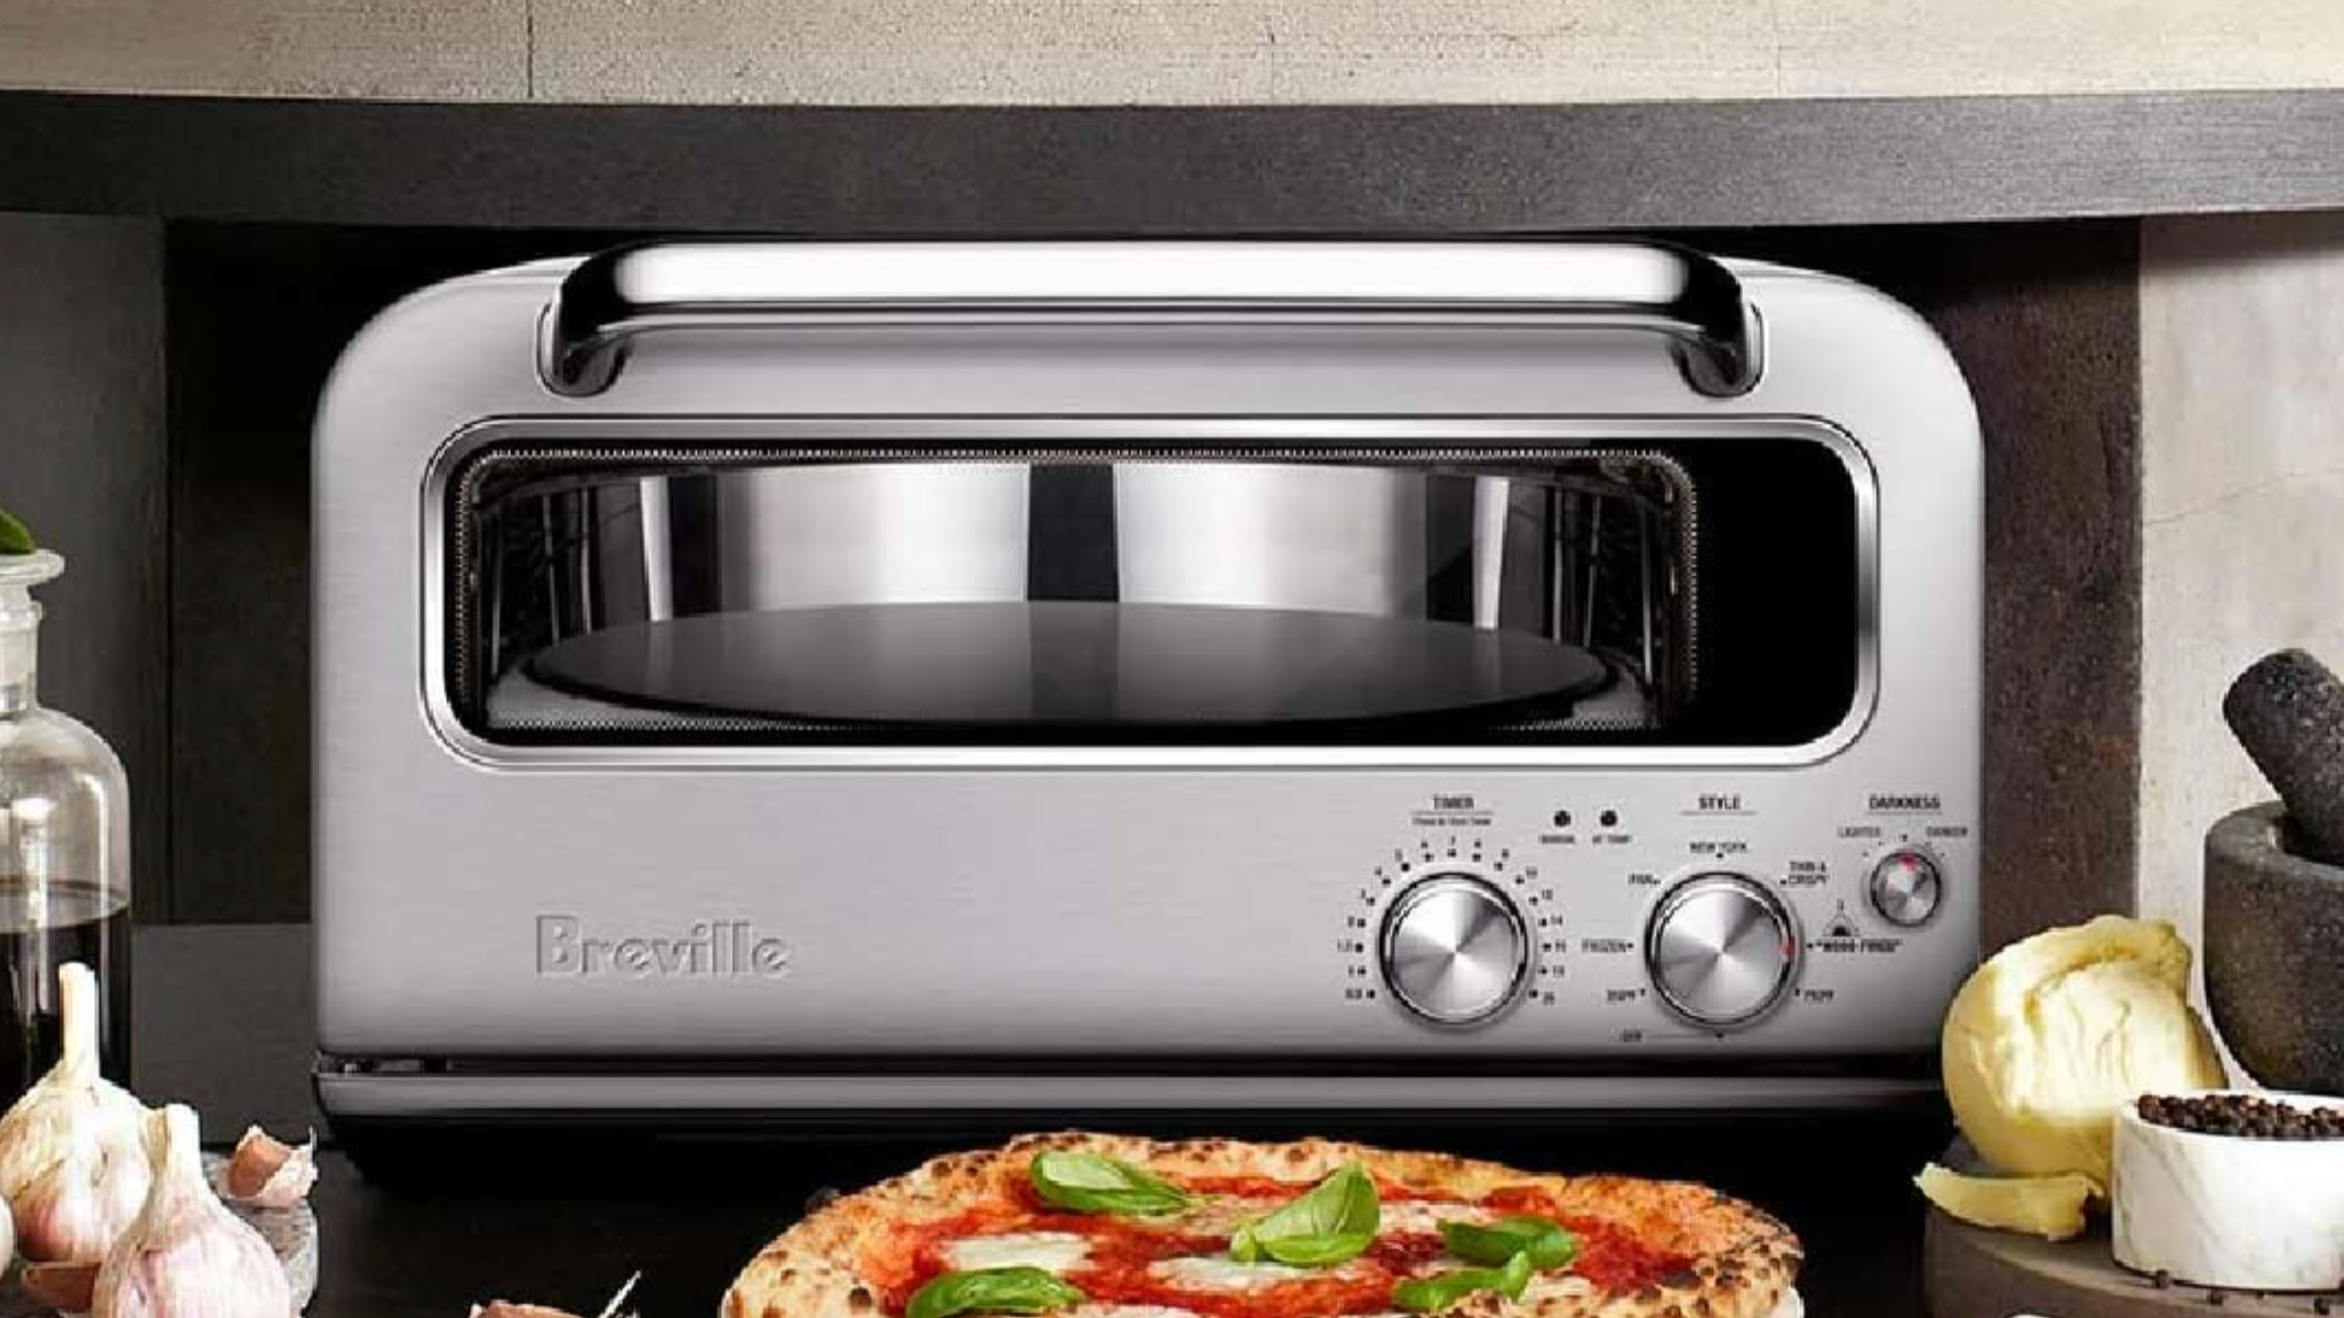 Breville pizza oven on kitchen counter with pizza in front, garlic to the left, mortar and pestle to the right